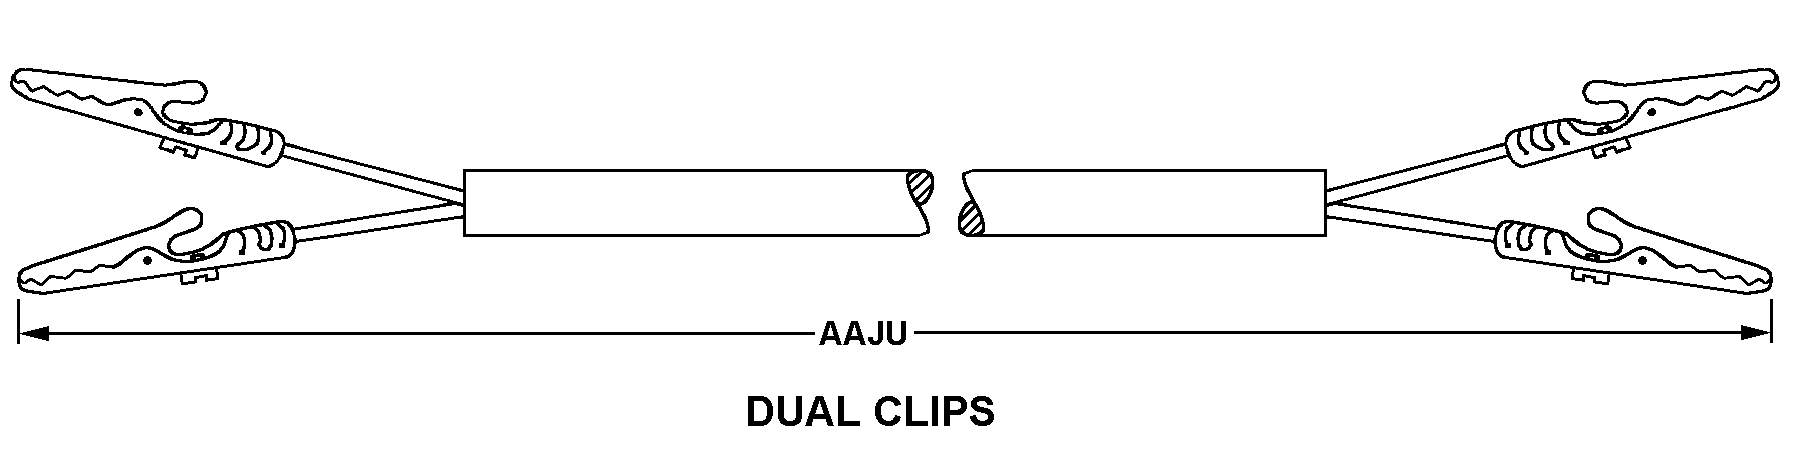 DUAL CLIPS style nsn 6515-01-053-2001